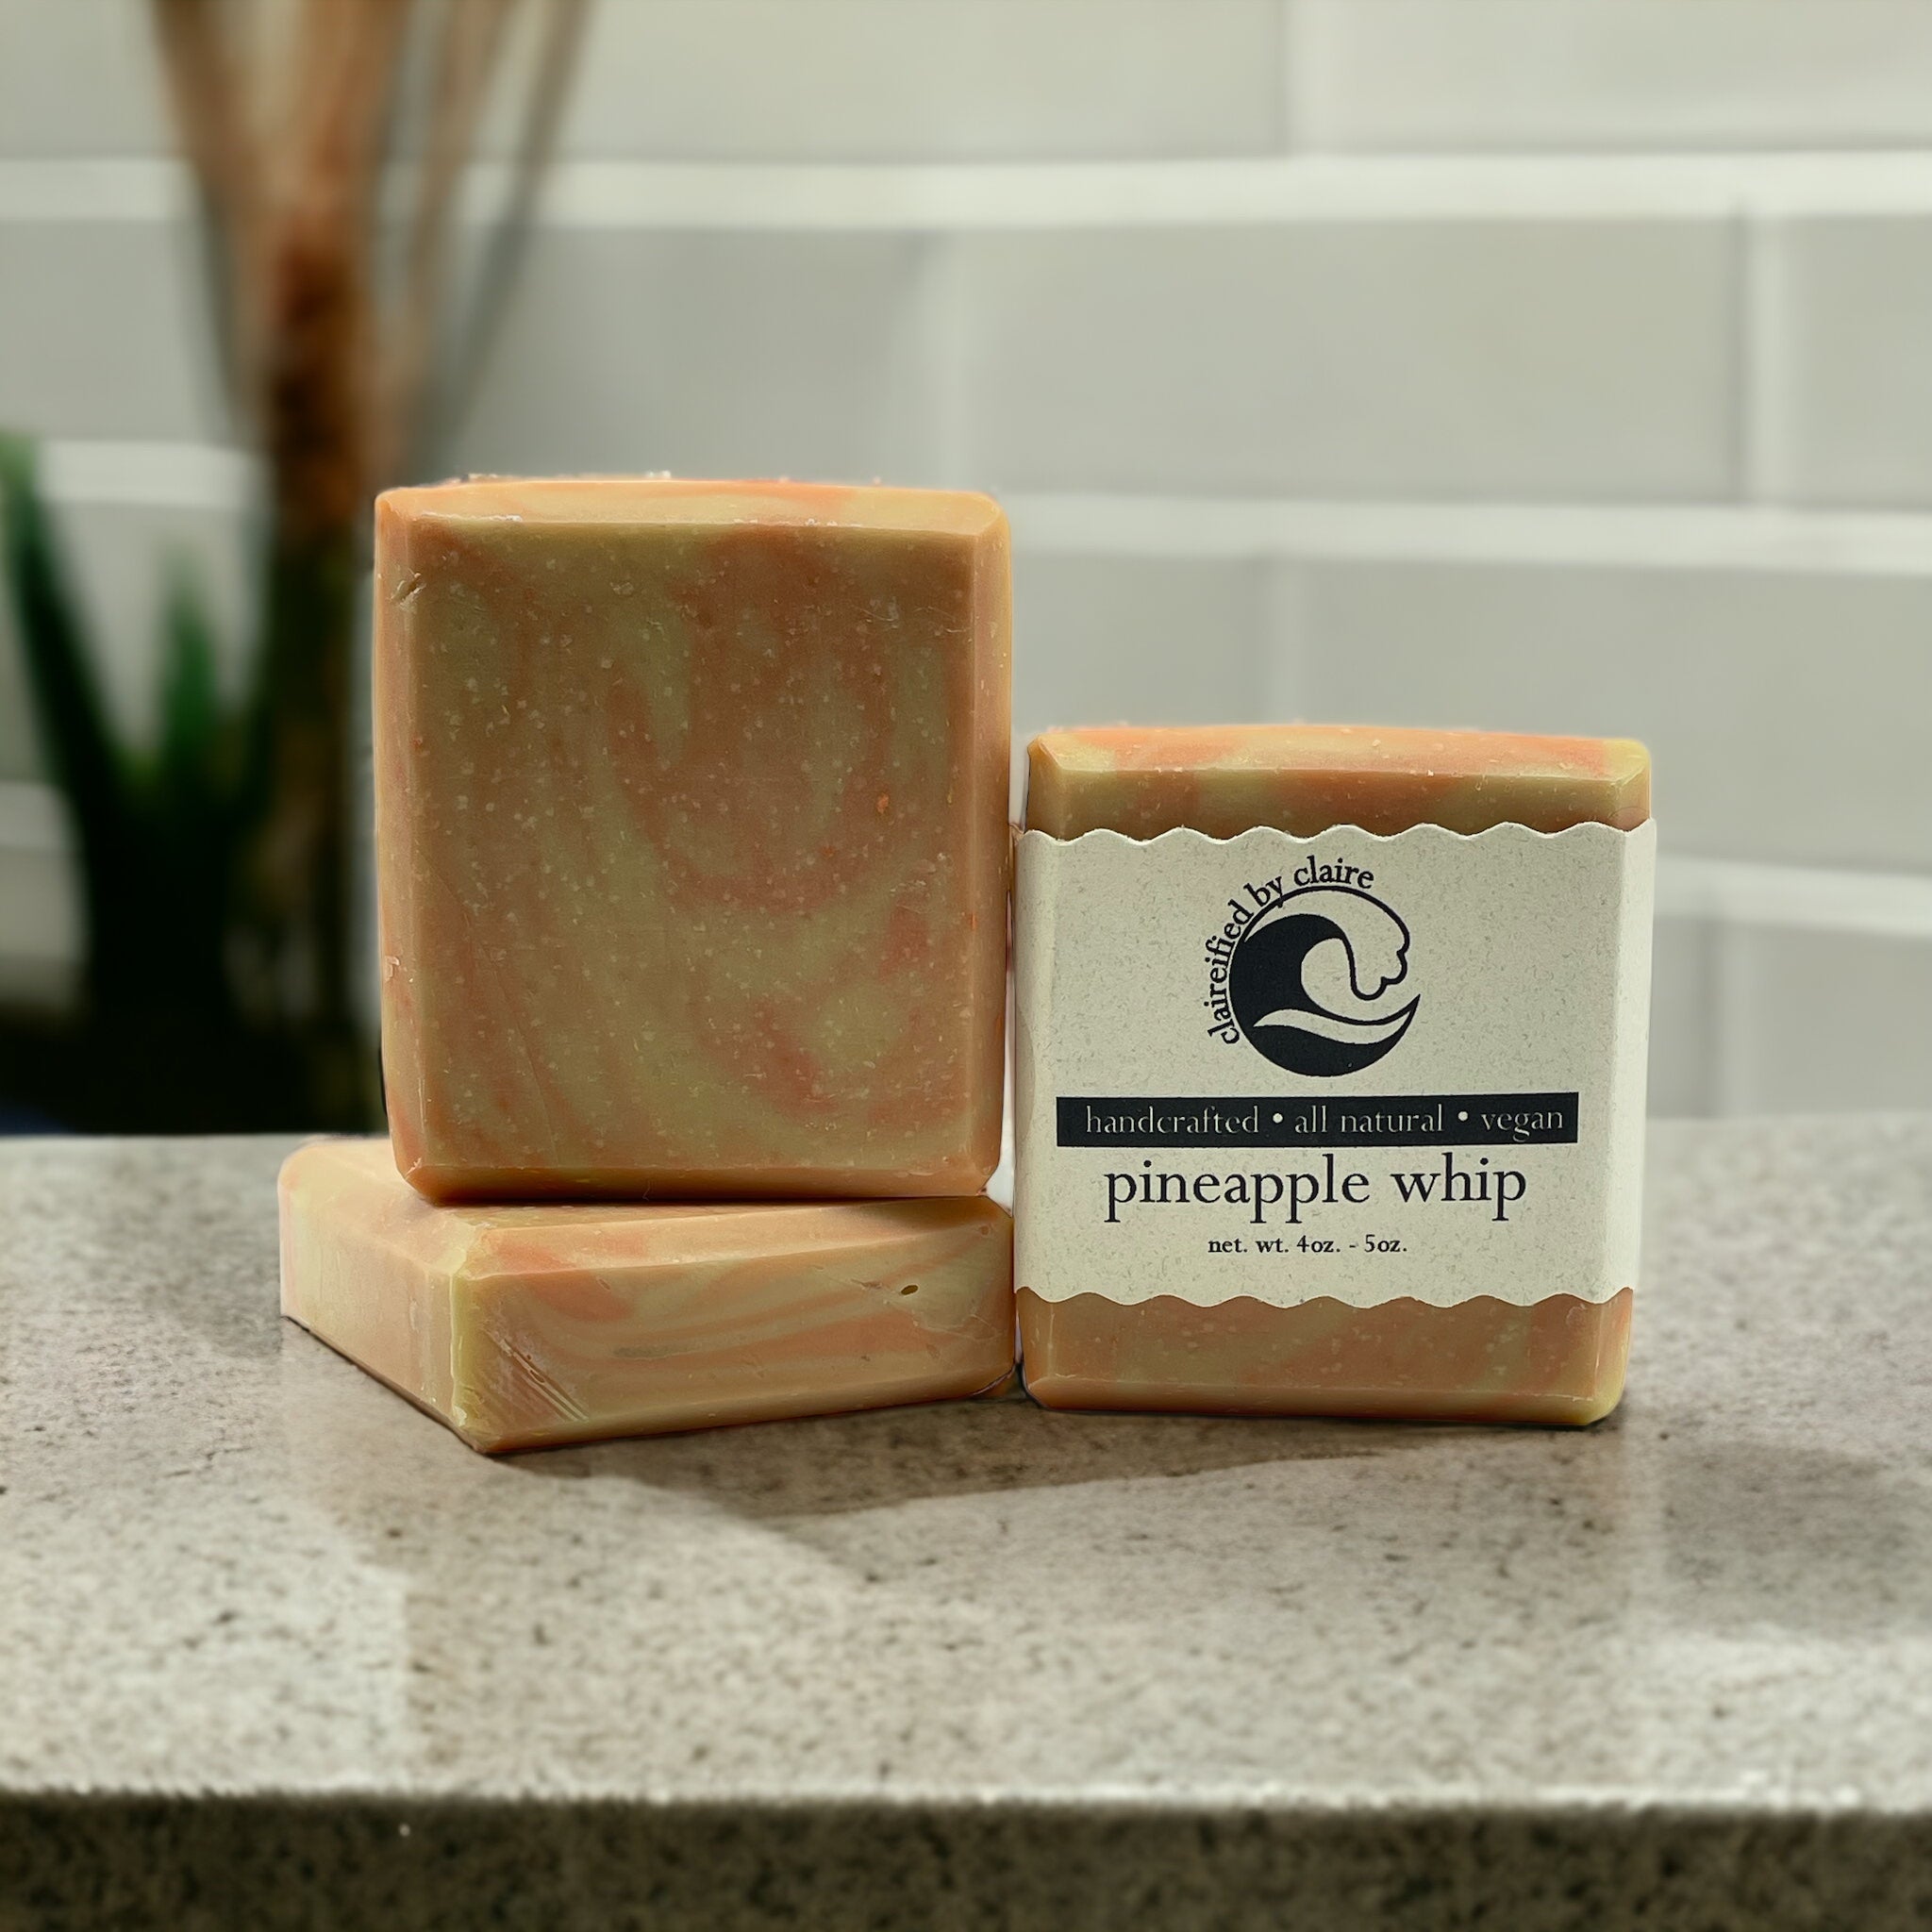 Pineapple Whip handmade soap inspired by the iconic Dole Whip from Disney World and Disneyland